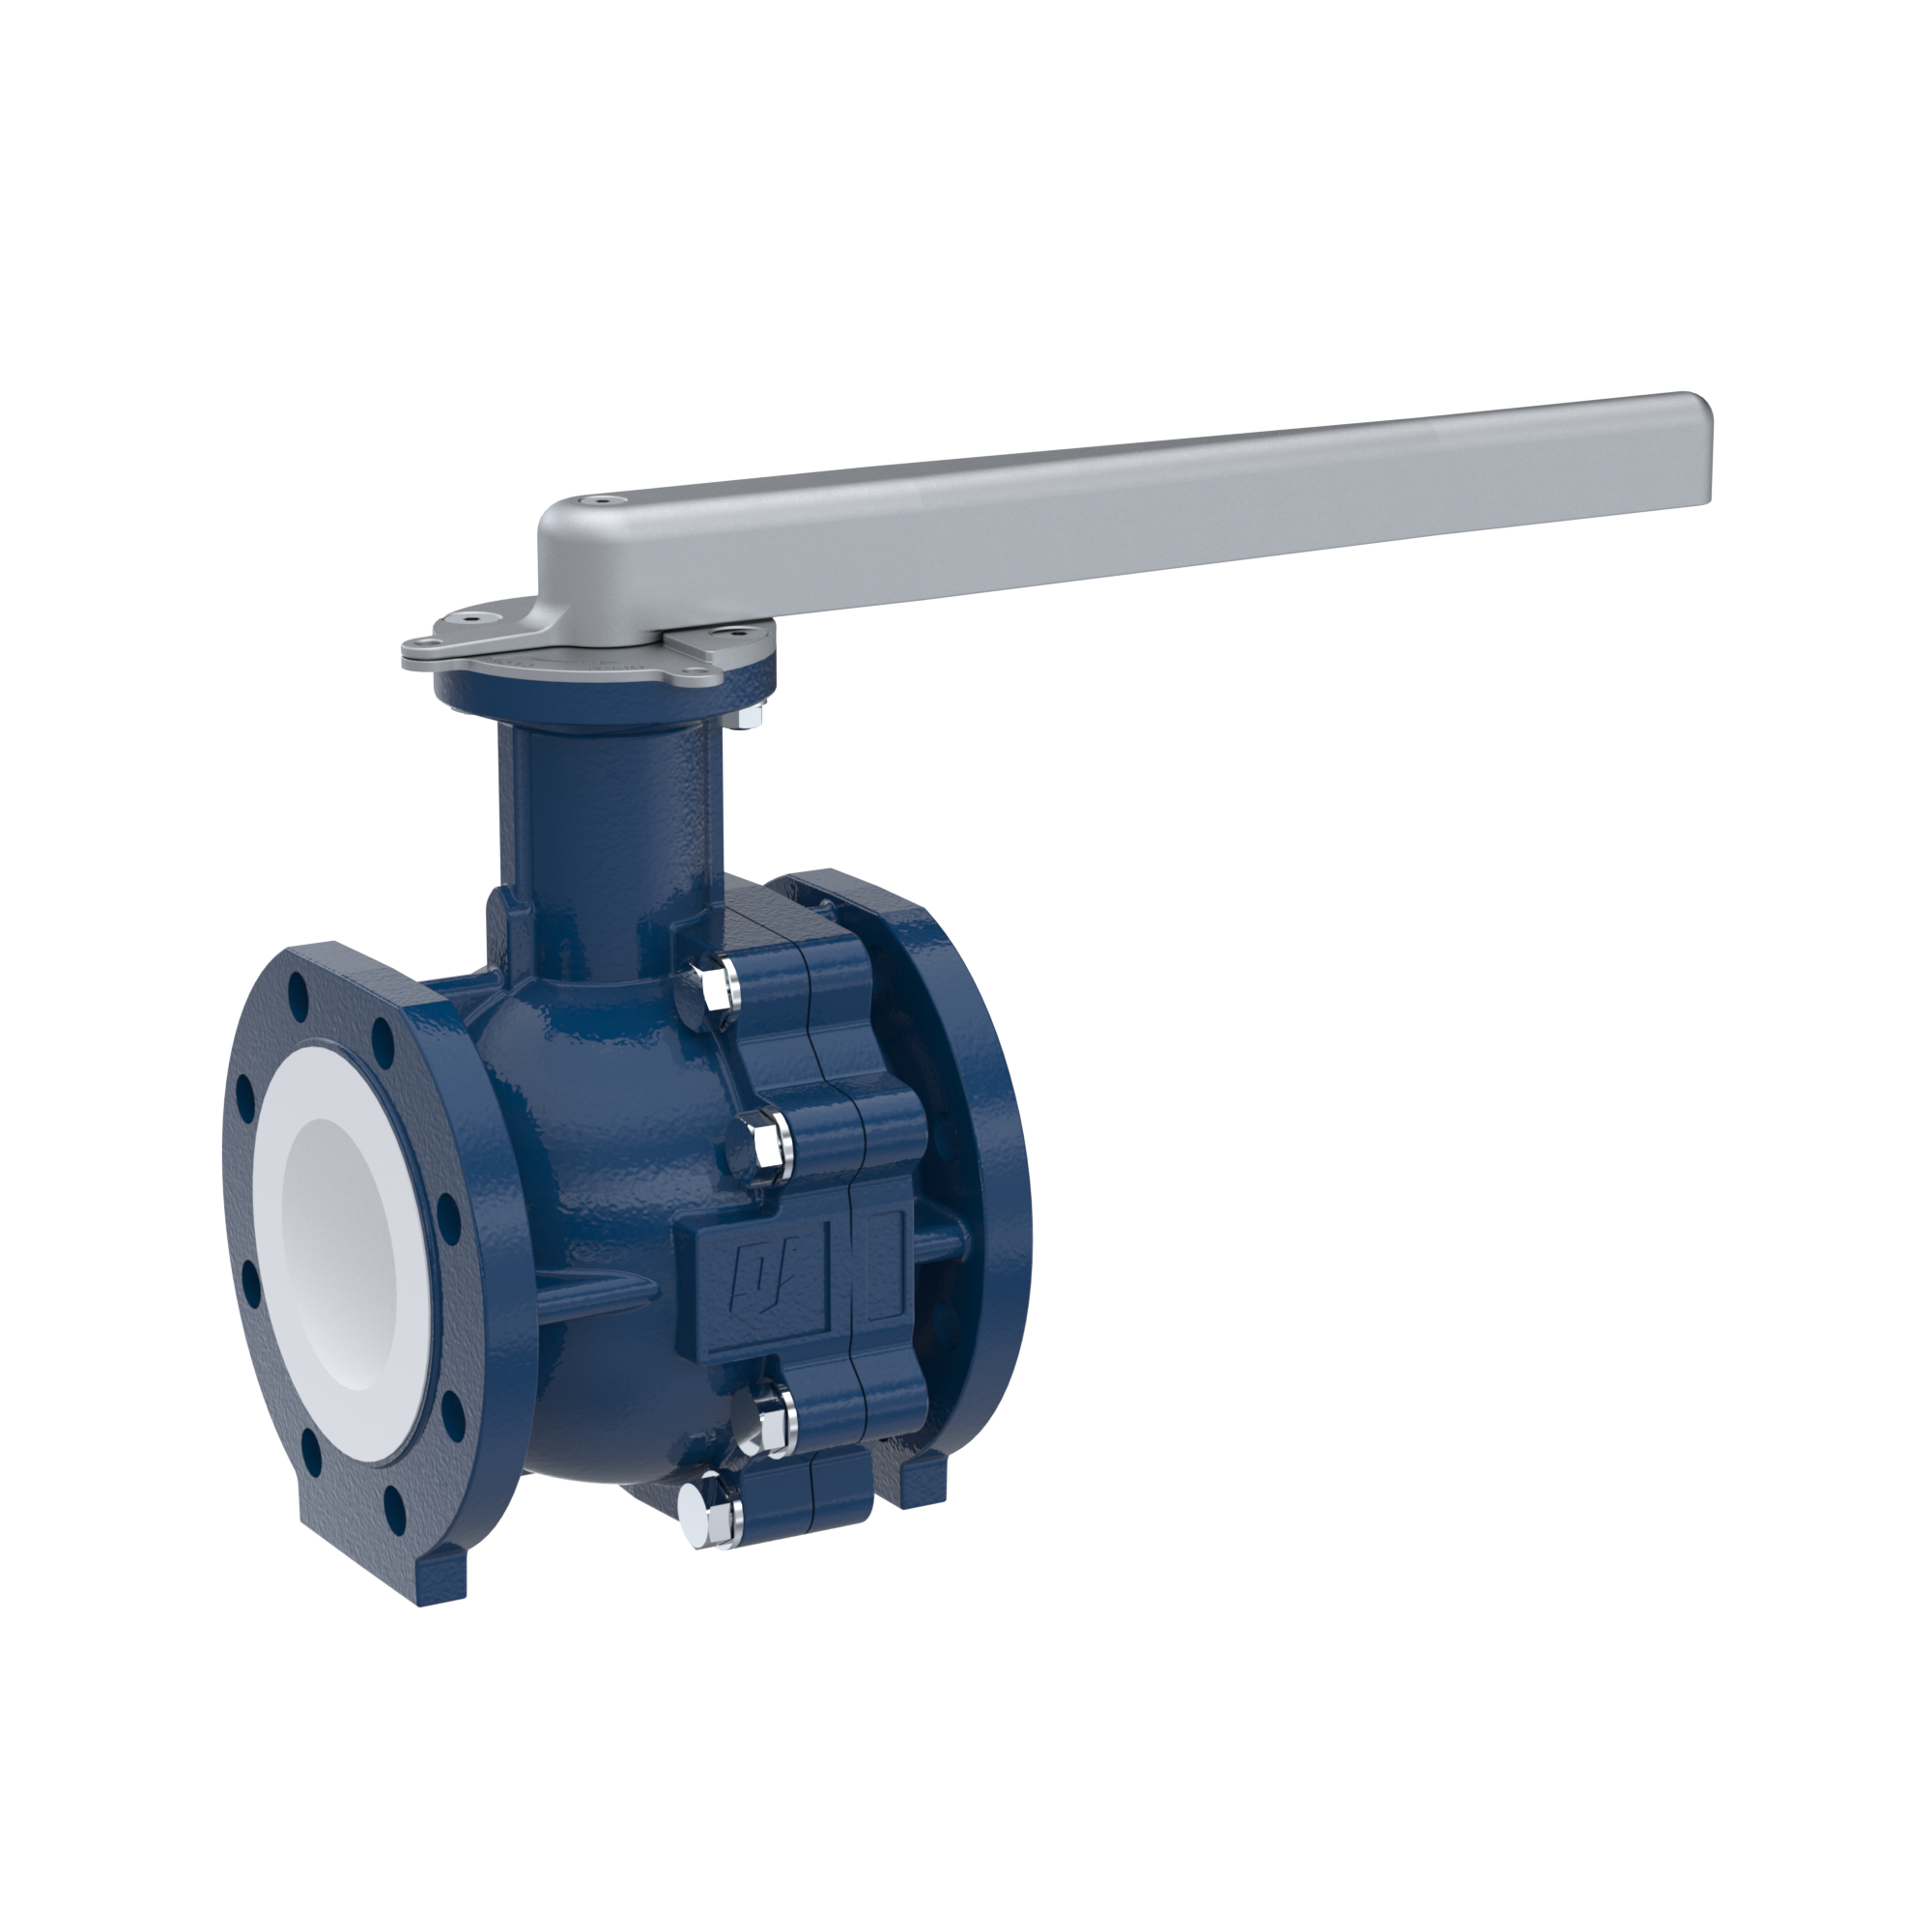 PFA-flange ball valve FK13 DN100 - 4" inch ANSI 150 made of spheroidal graphite cast iron with lever hand